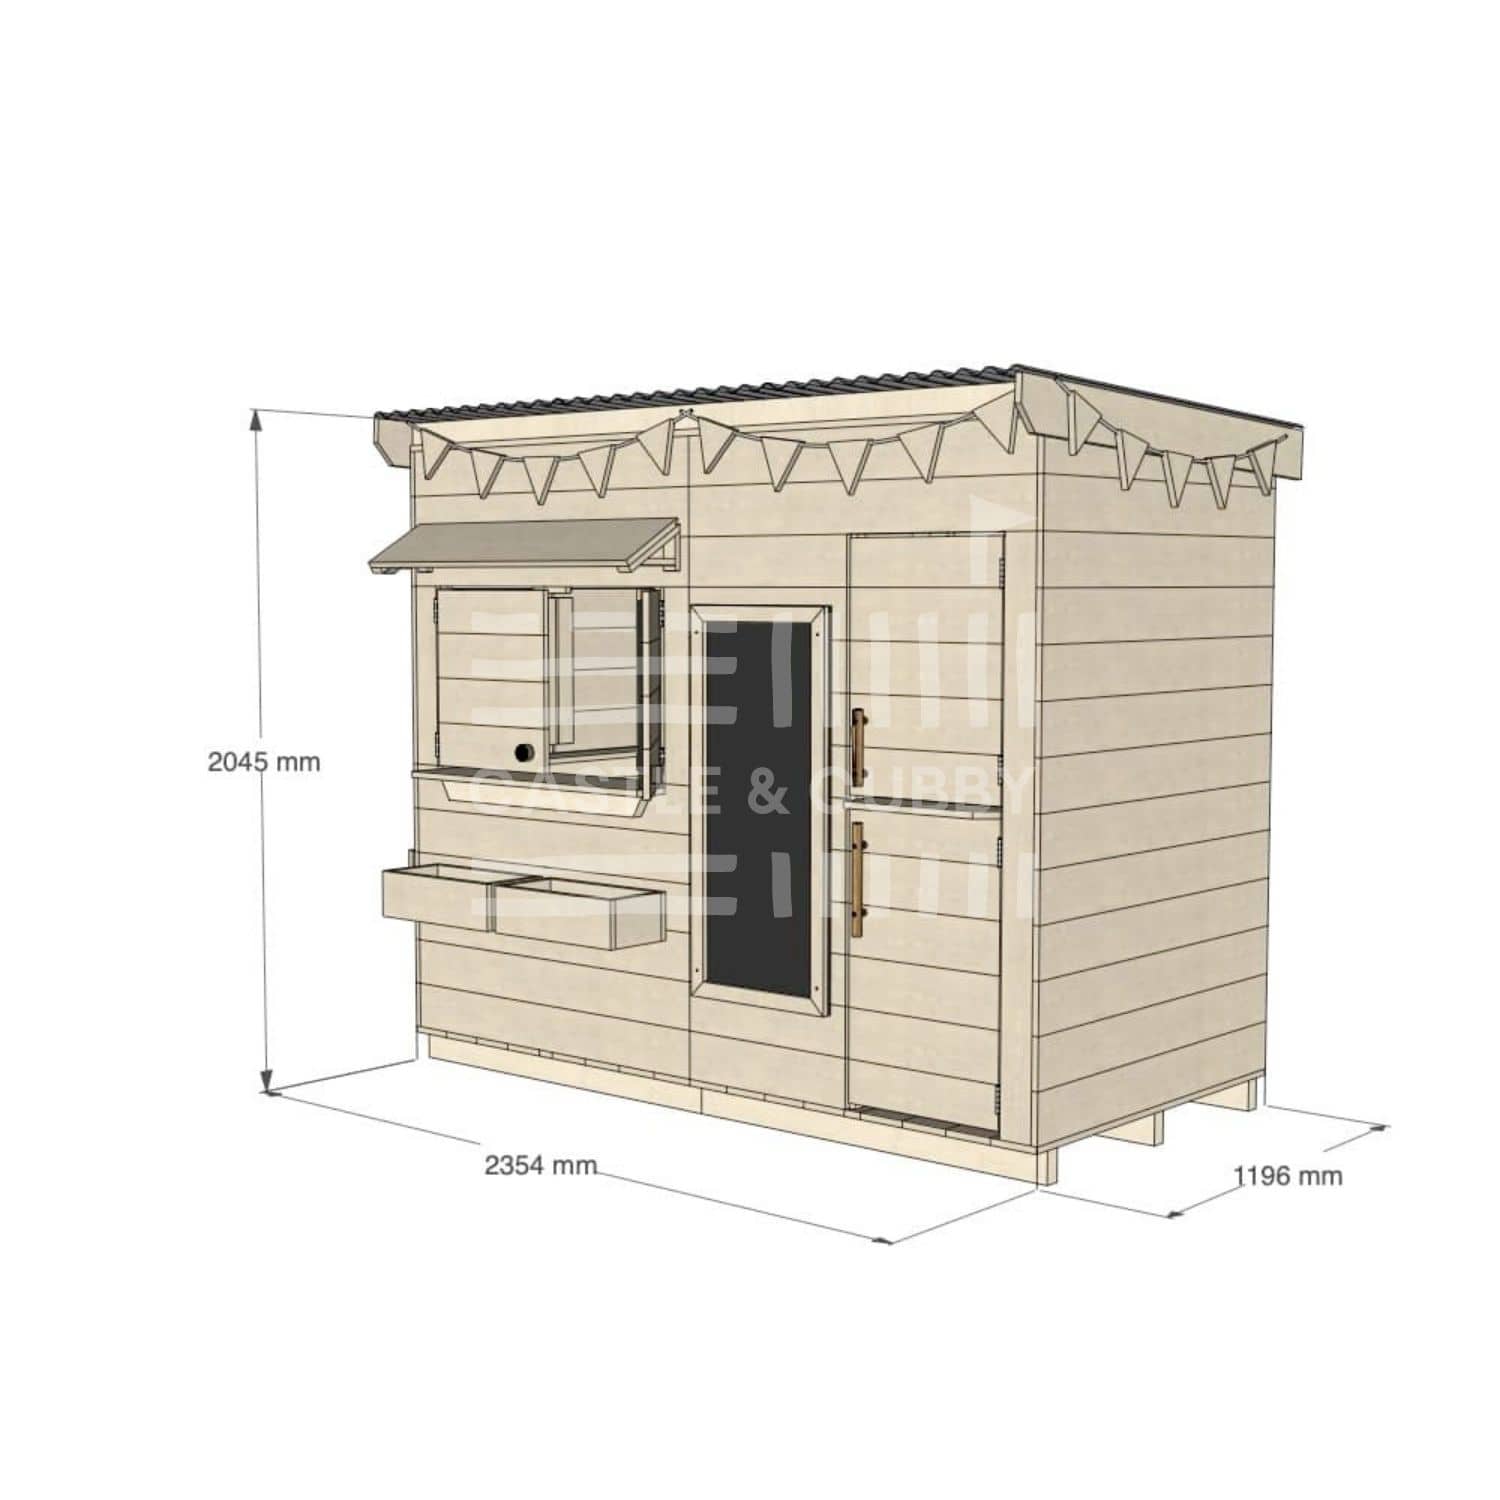 Flat roof extended height raw pine timber cubby house domestic midi rectangle size with accessories